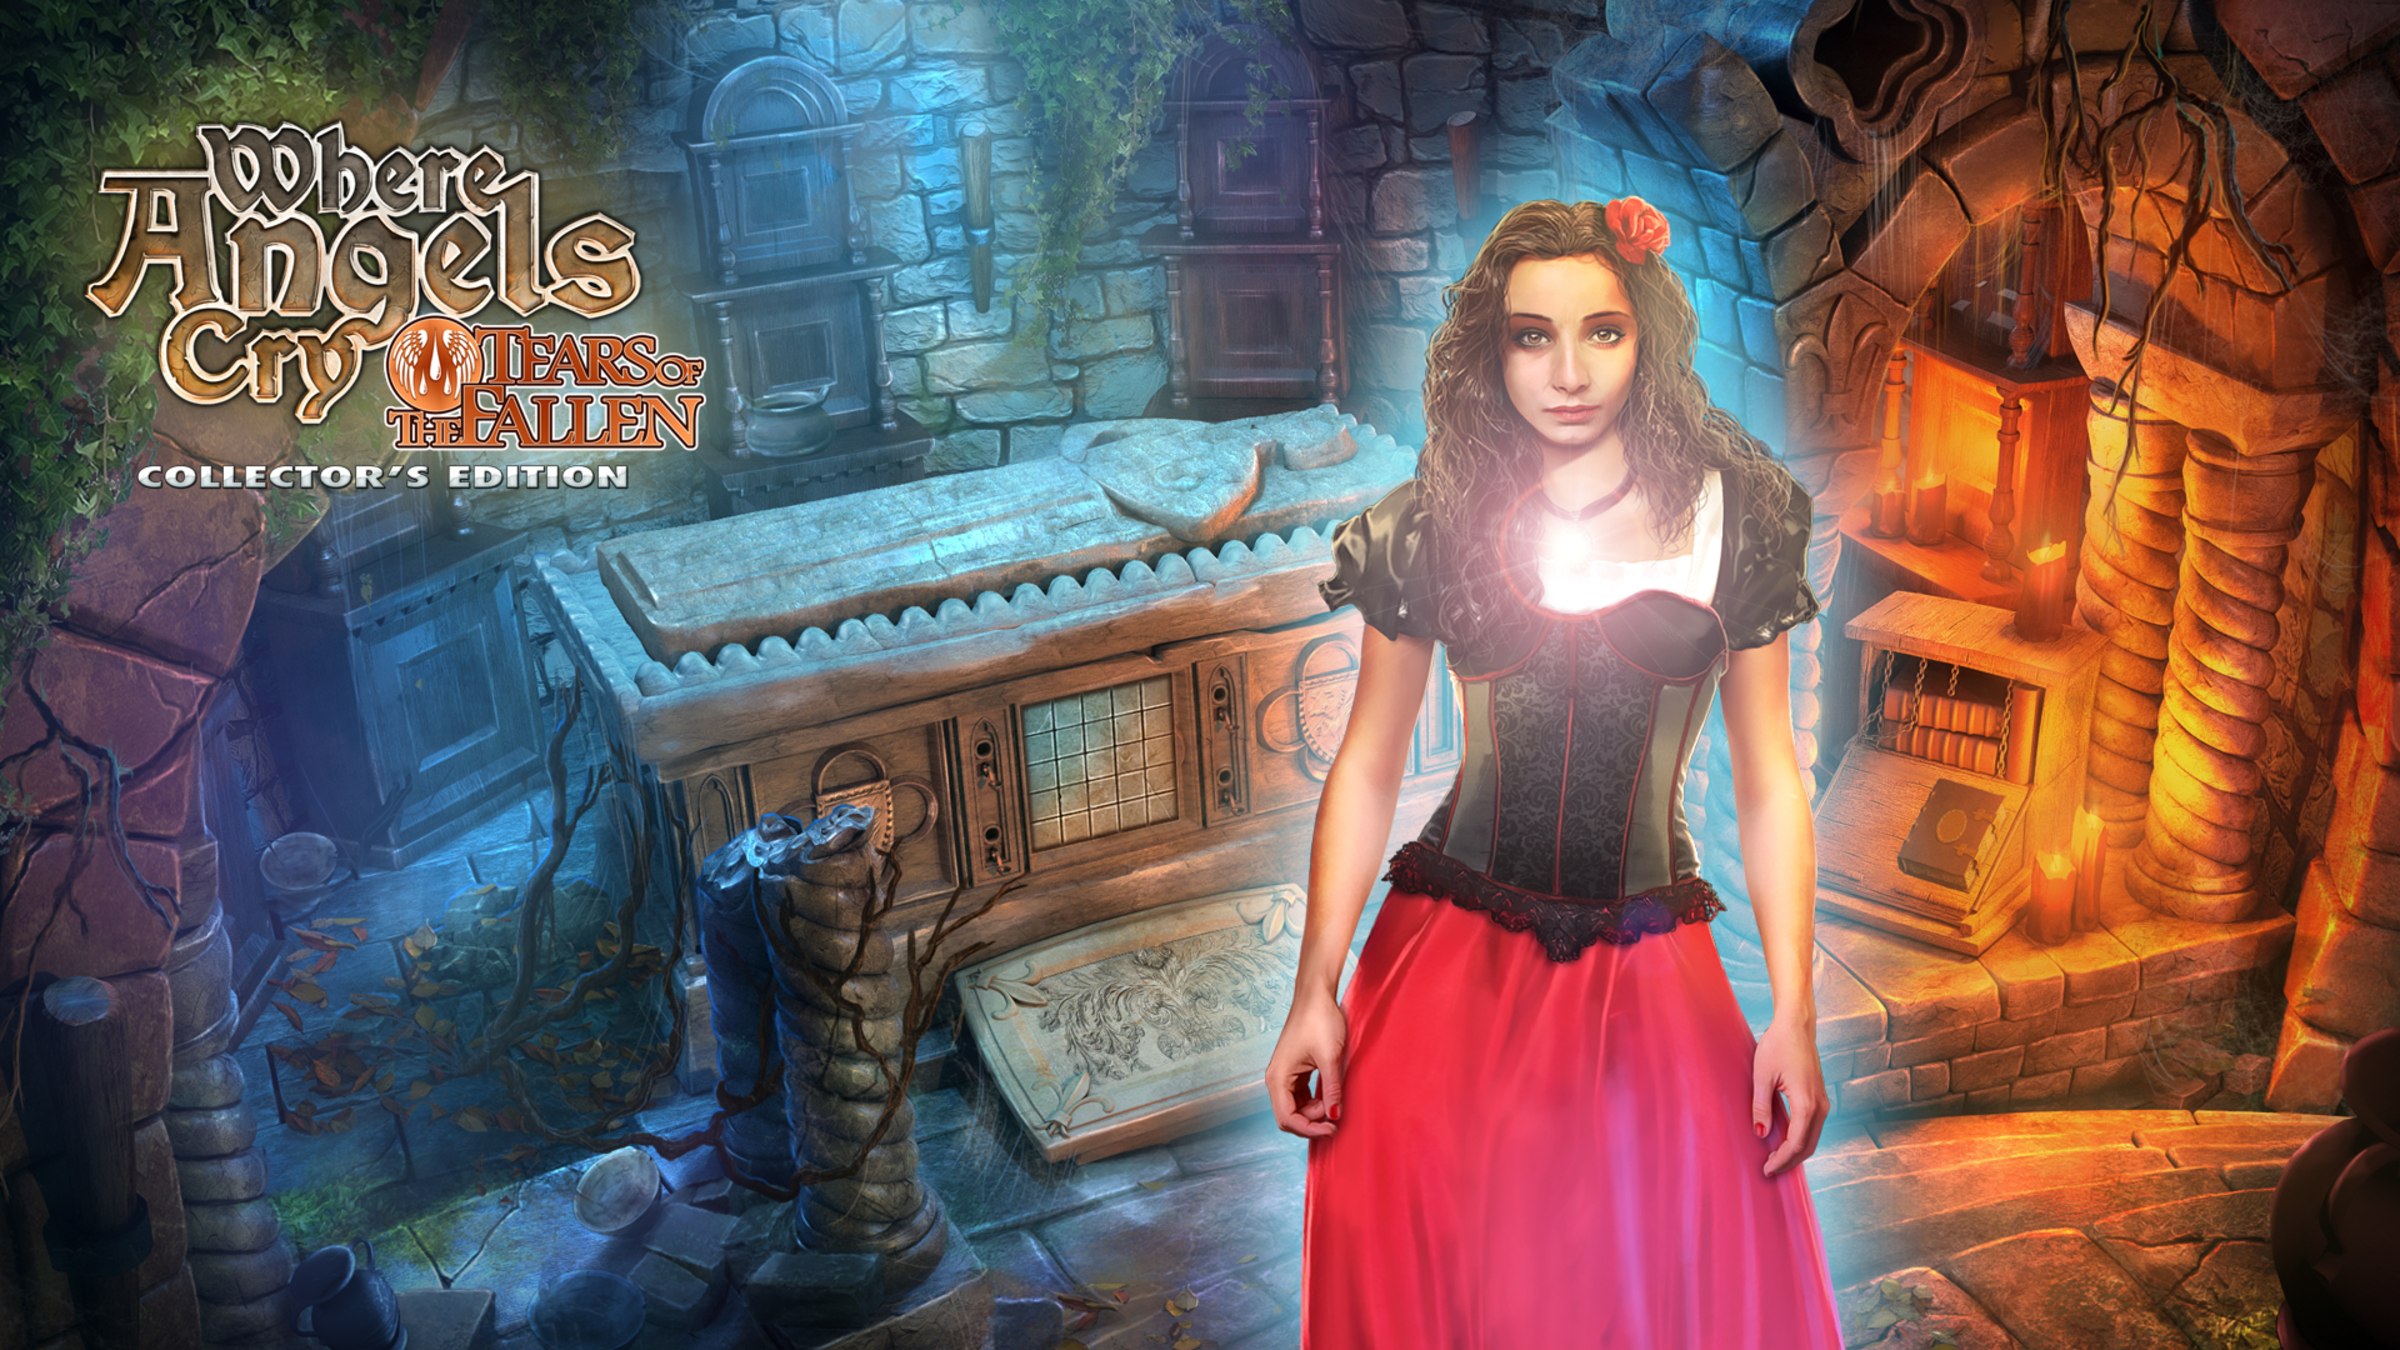 Legacy Games Amazing Hidden Object Games for PC: Murder Mystery